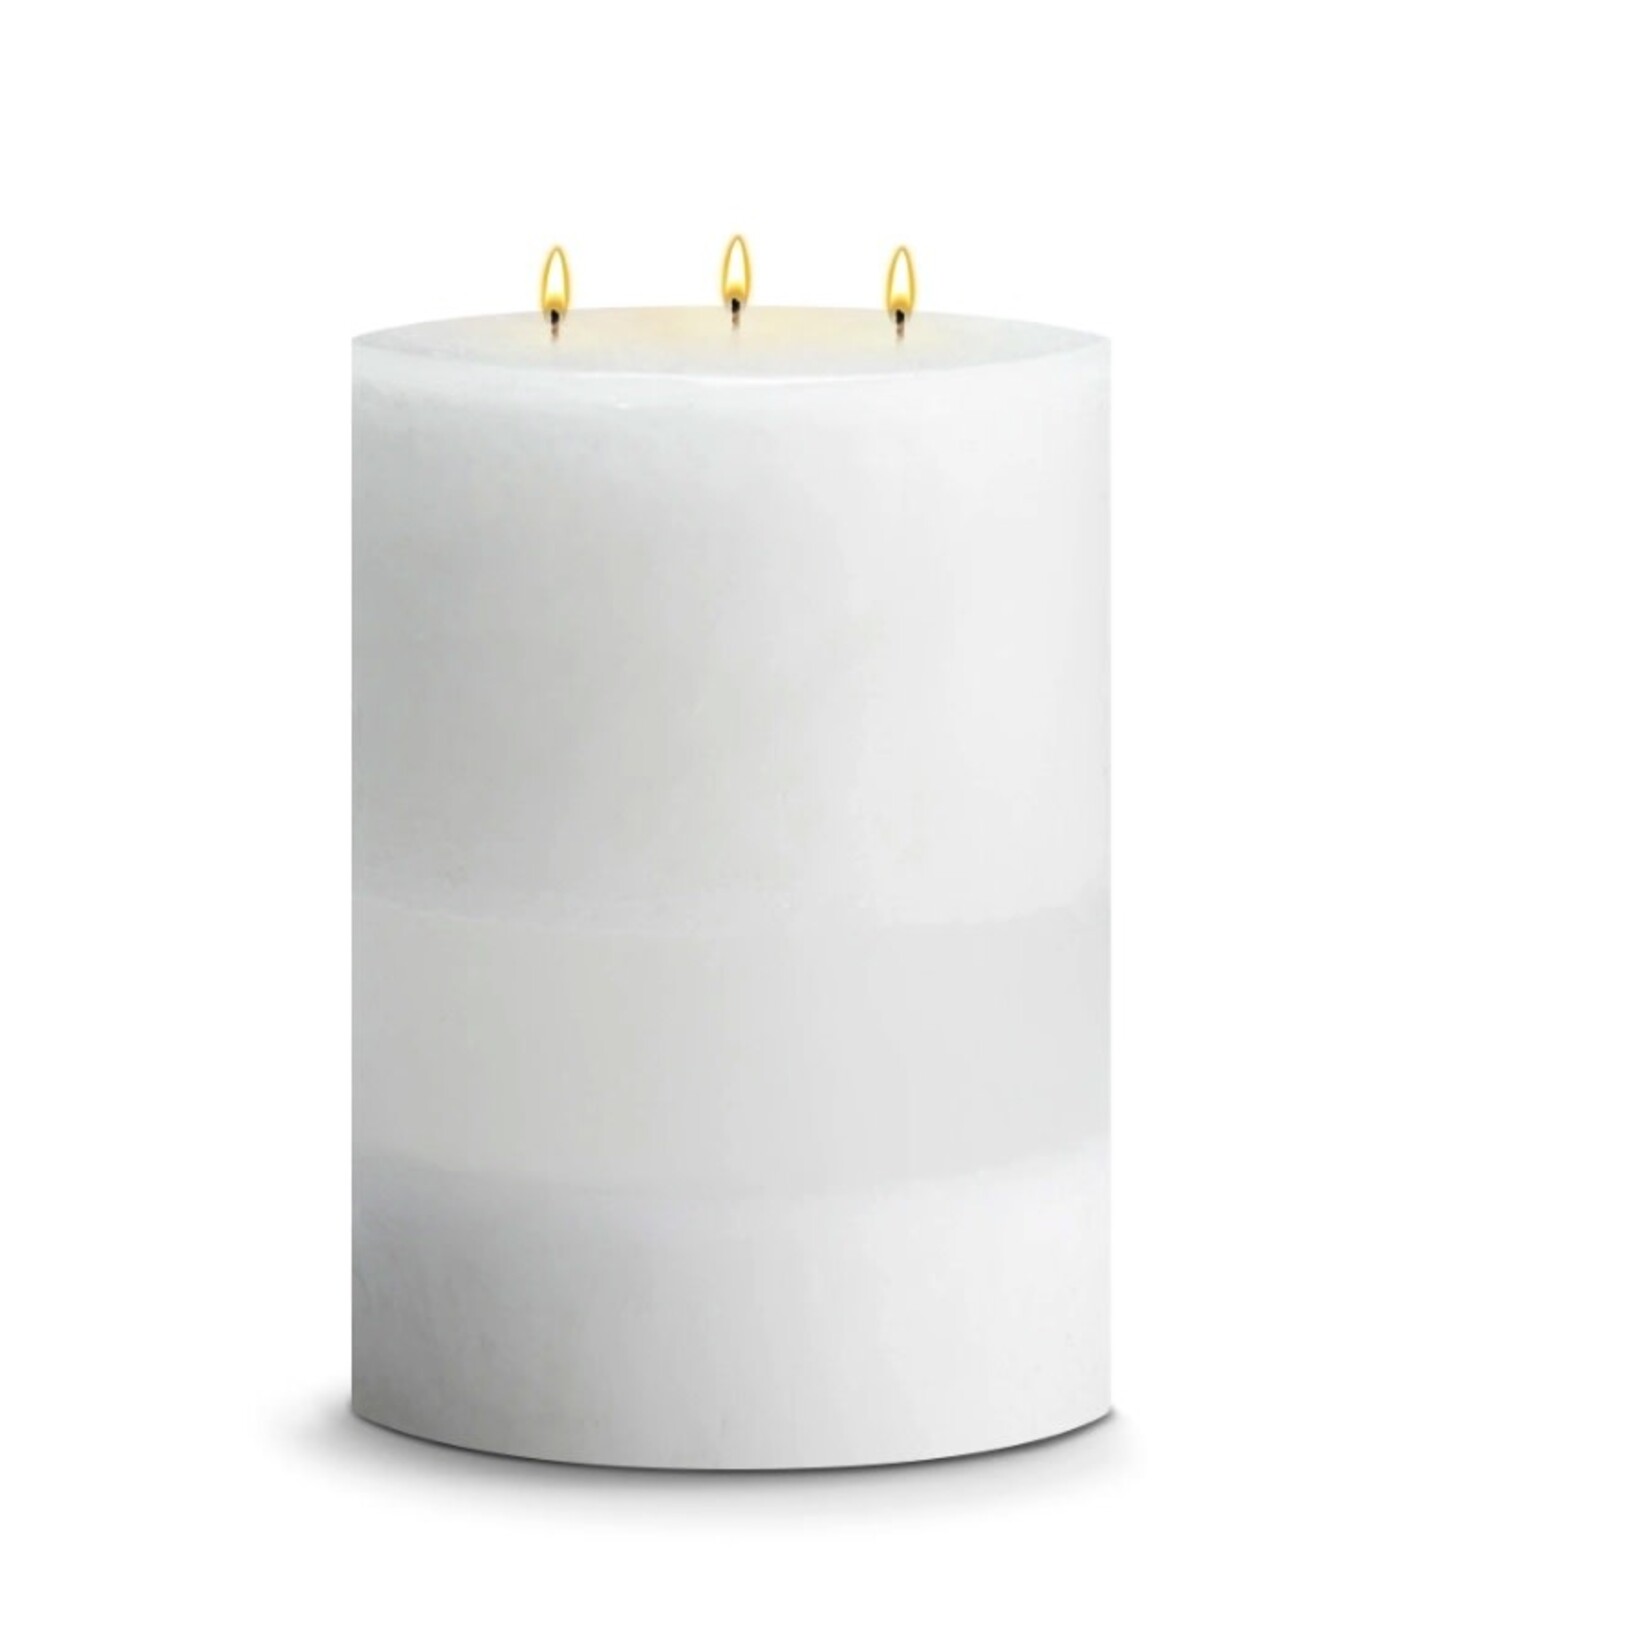 STONE CANDLES STONE PILLAR CANDLE ELLIPTICAL WHITE TEA GINGER ROOT